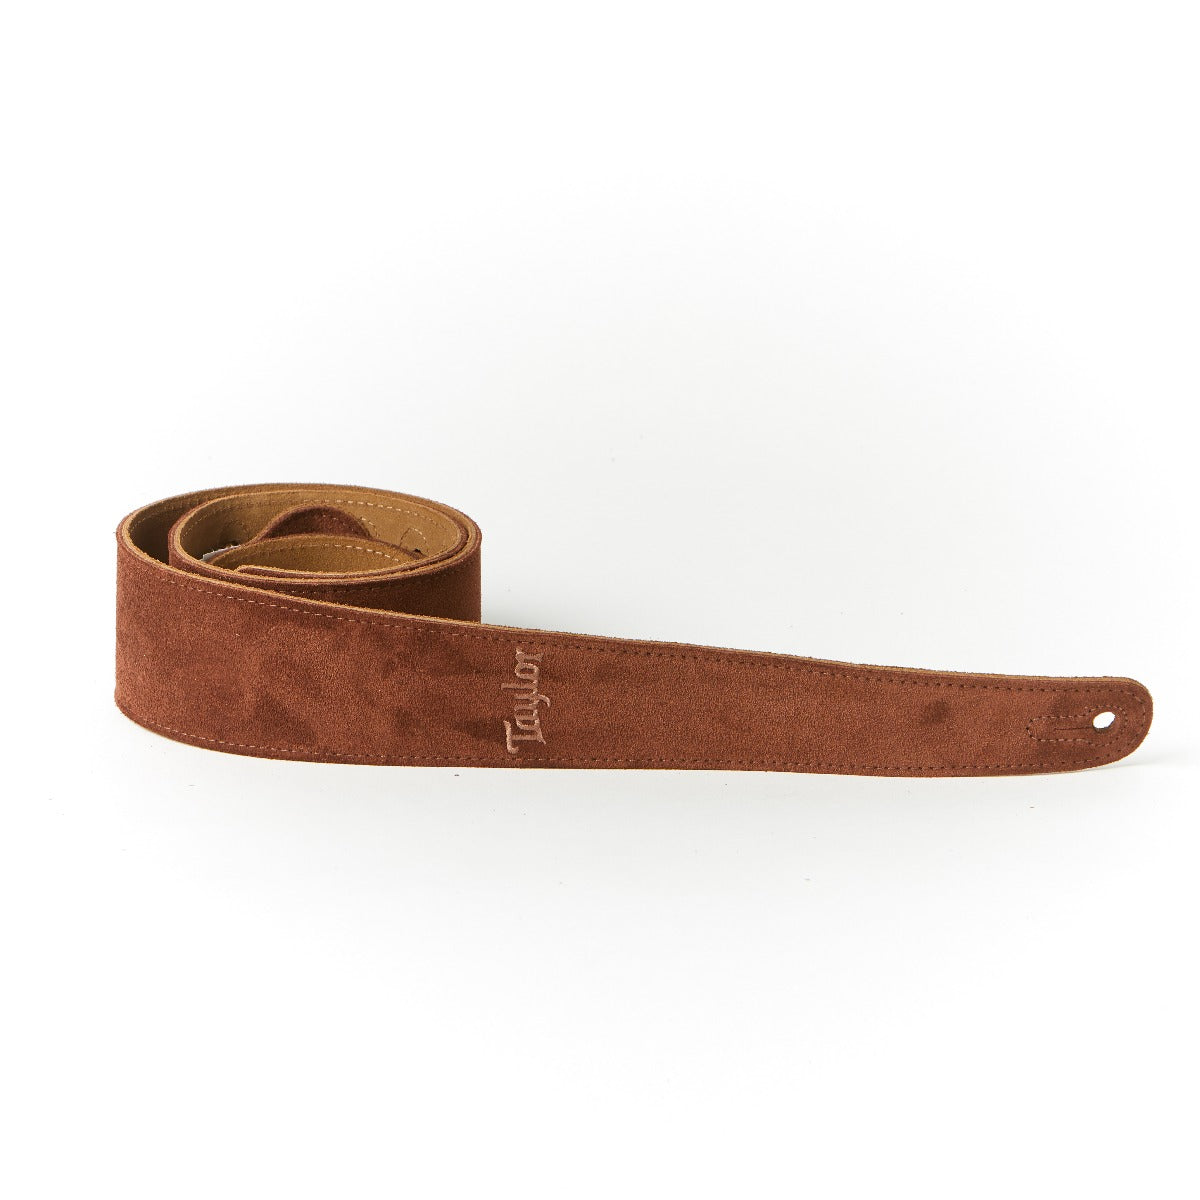 Taylor 2.5" Embroidered Suede Strap - Chocolate 